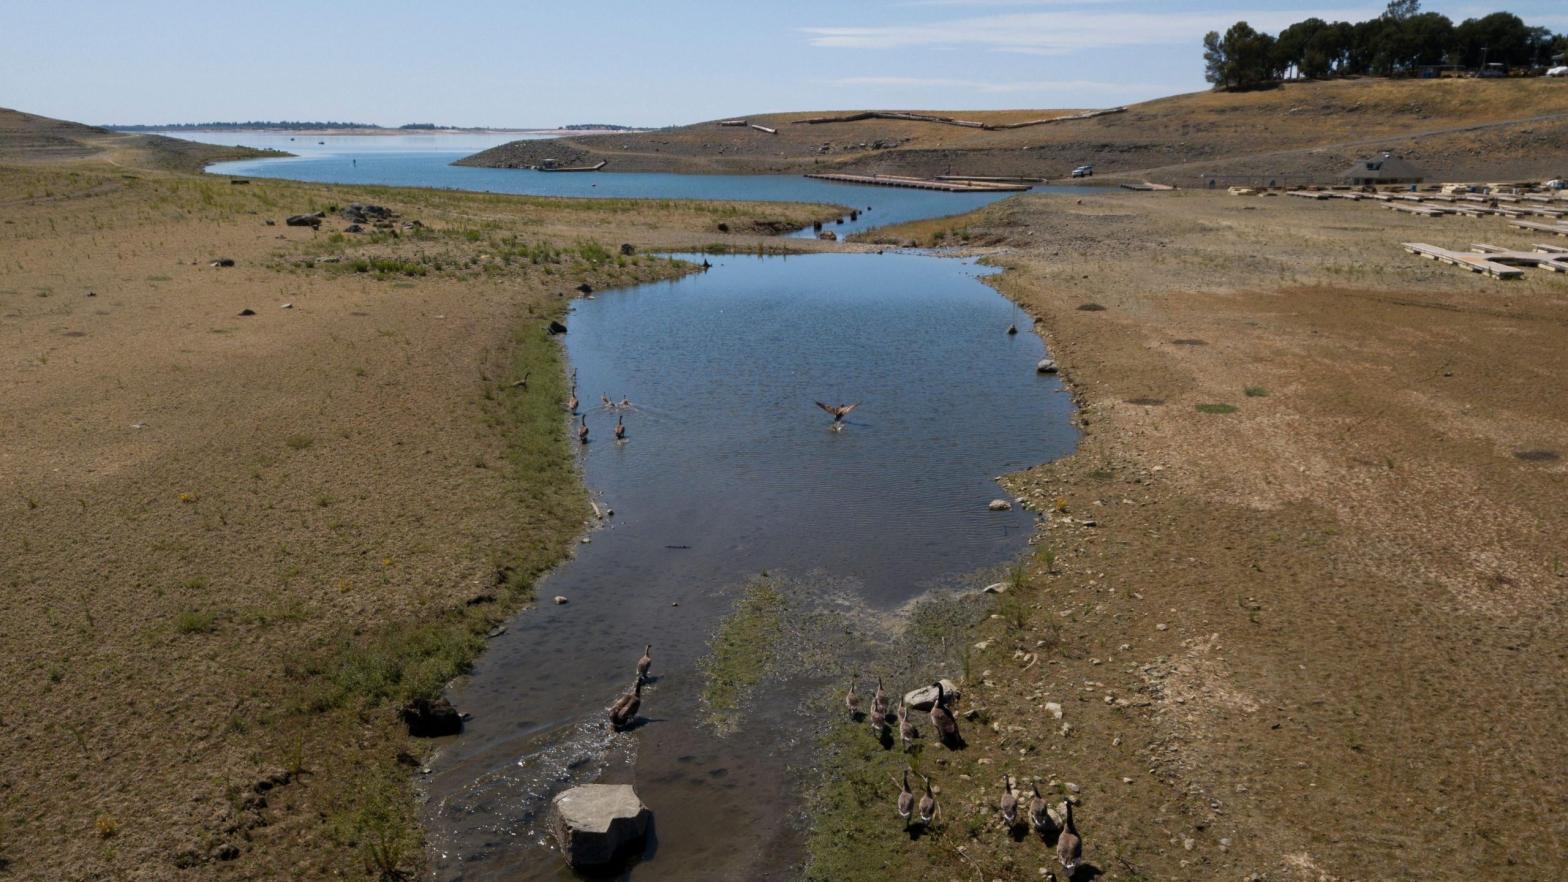 A dry lake bed at Folsom Lake Marina. Researchers have probed the increasingly shallow lake to find a plane that crashed decades ago. (Photo: Patrick T. Fallon, Getty Images)